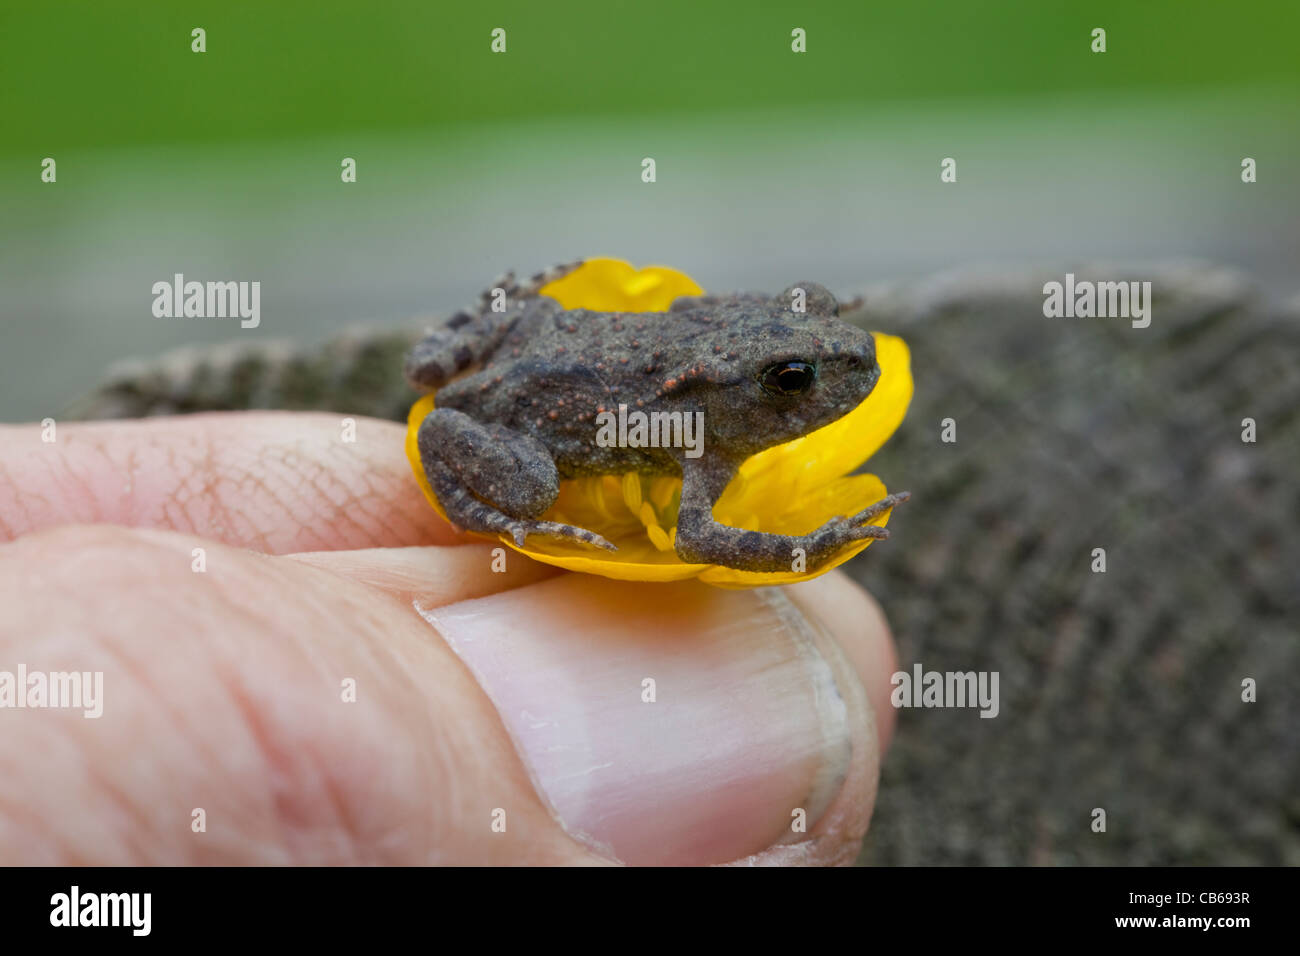 Common Toad (Bufo bufo). Recently metamorphosed 'toadlet', on a buttercup flower held between fingers. Stock Photo